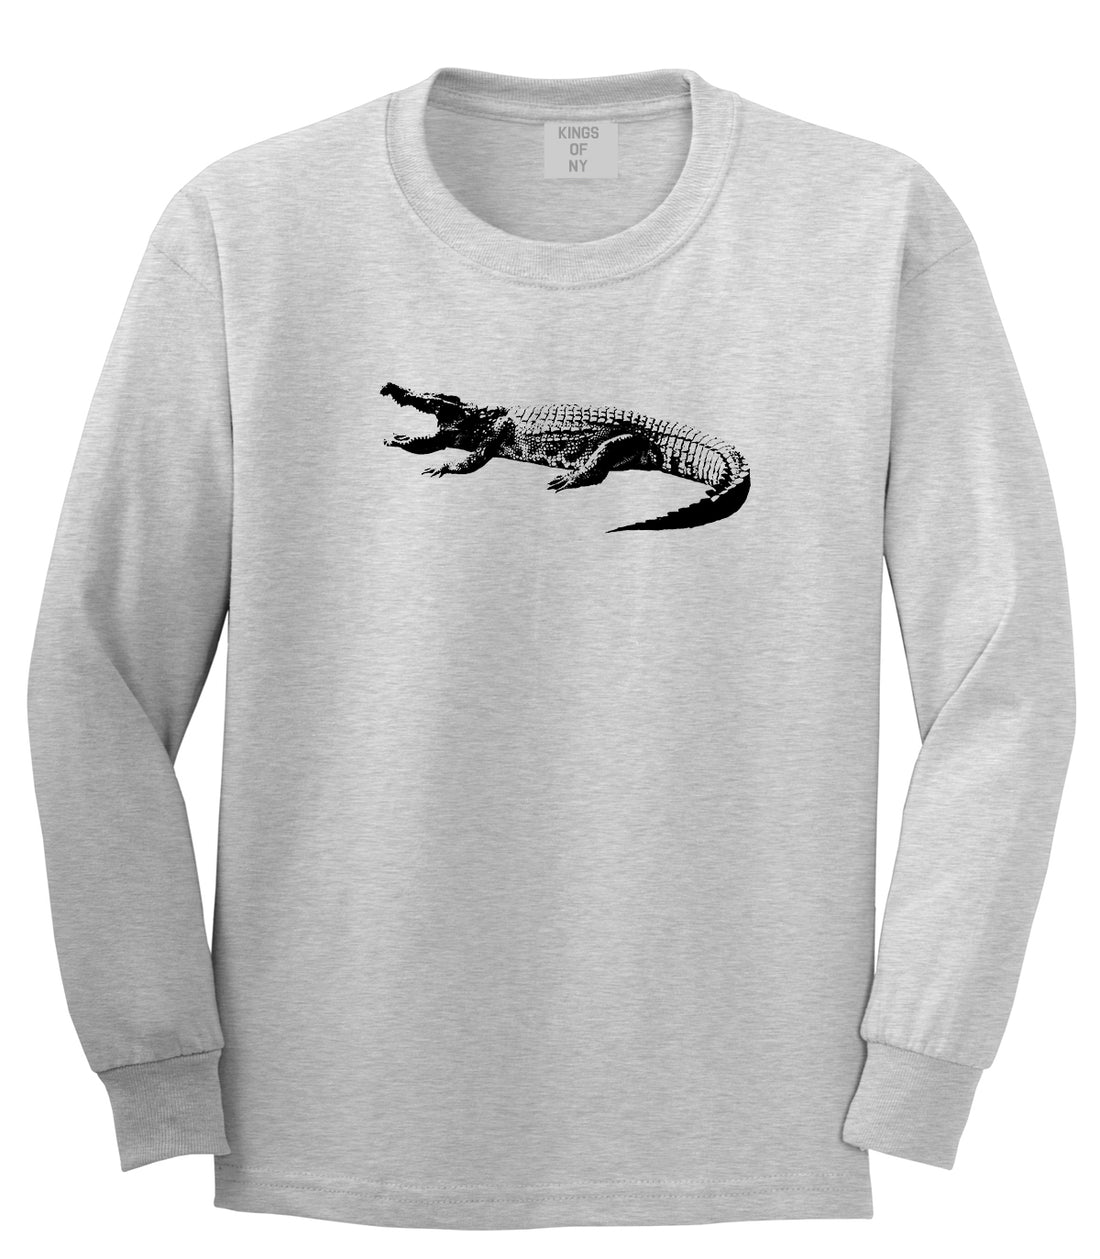 Alligator Grey Long Sleeve T-Shirt by Kings Of NY